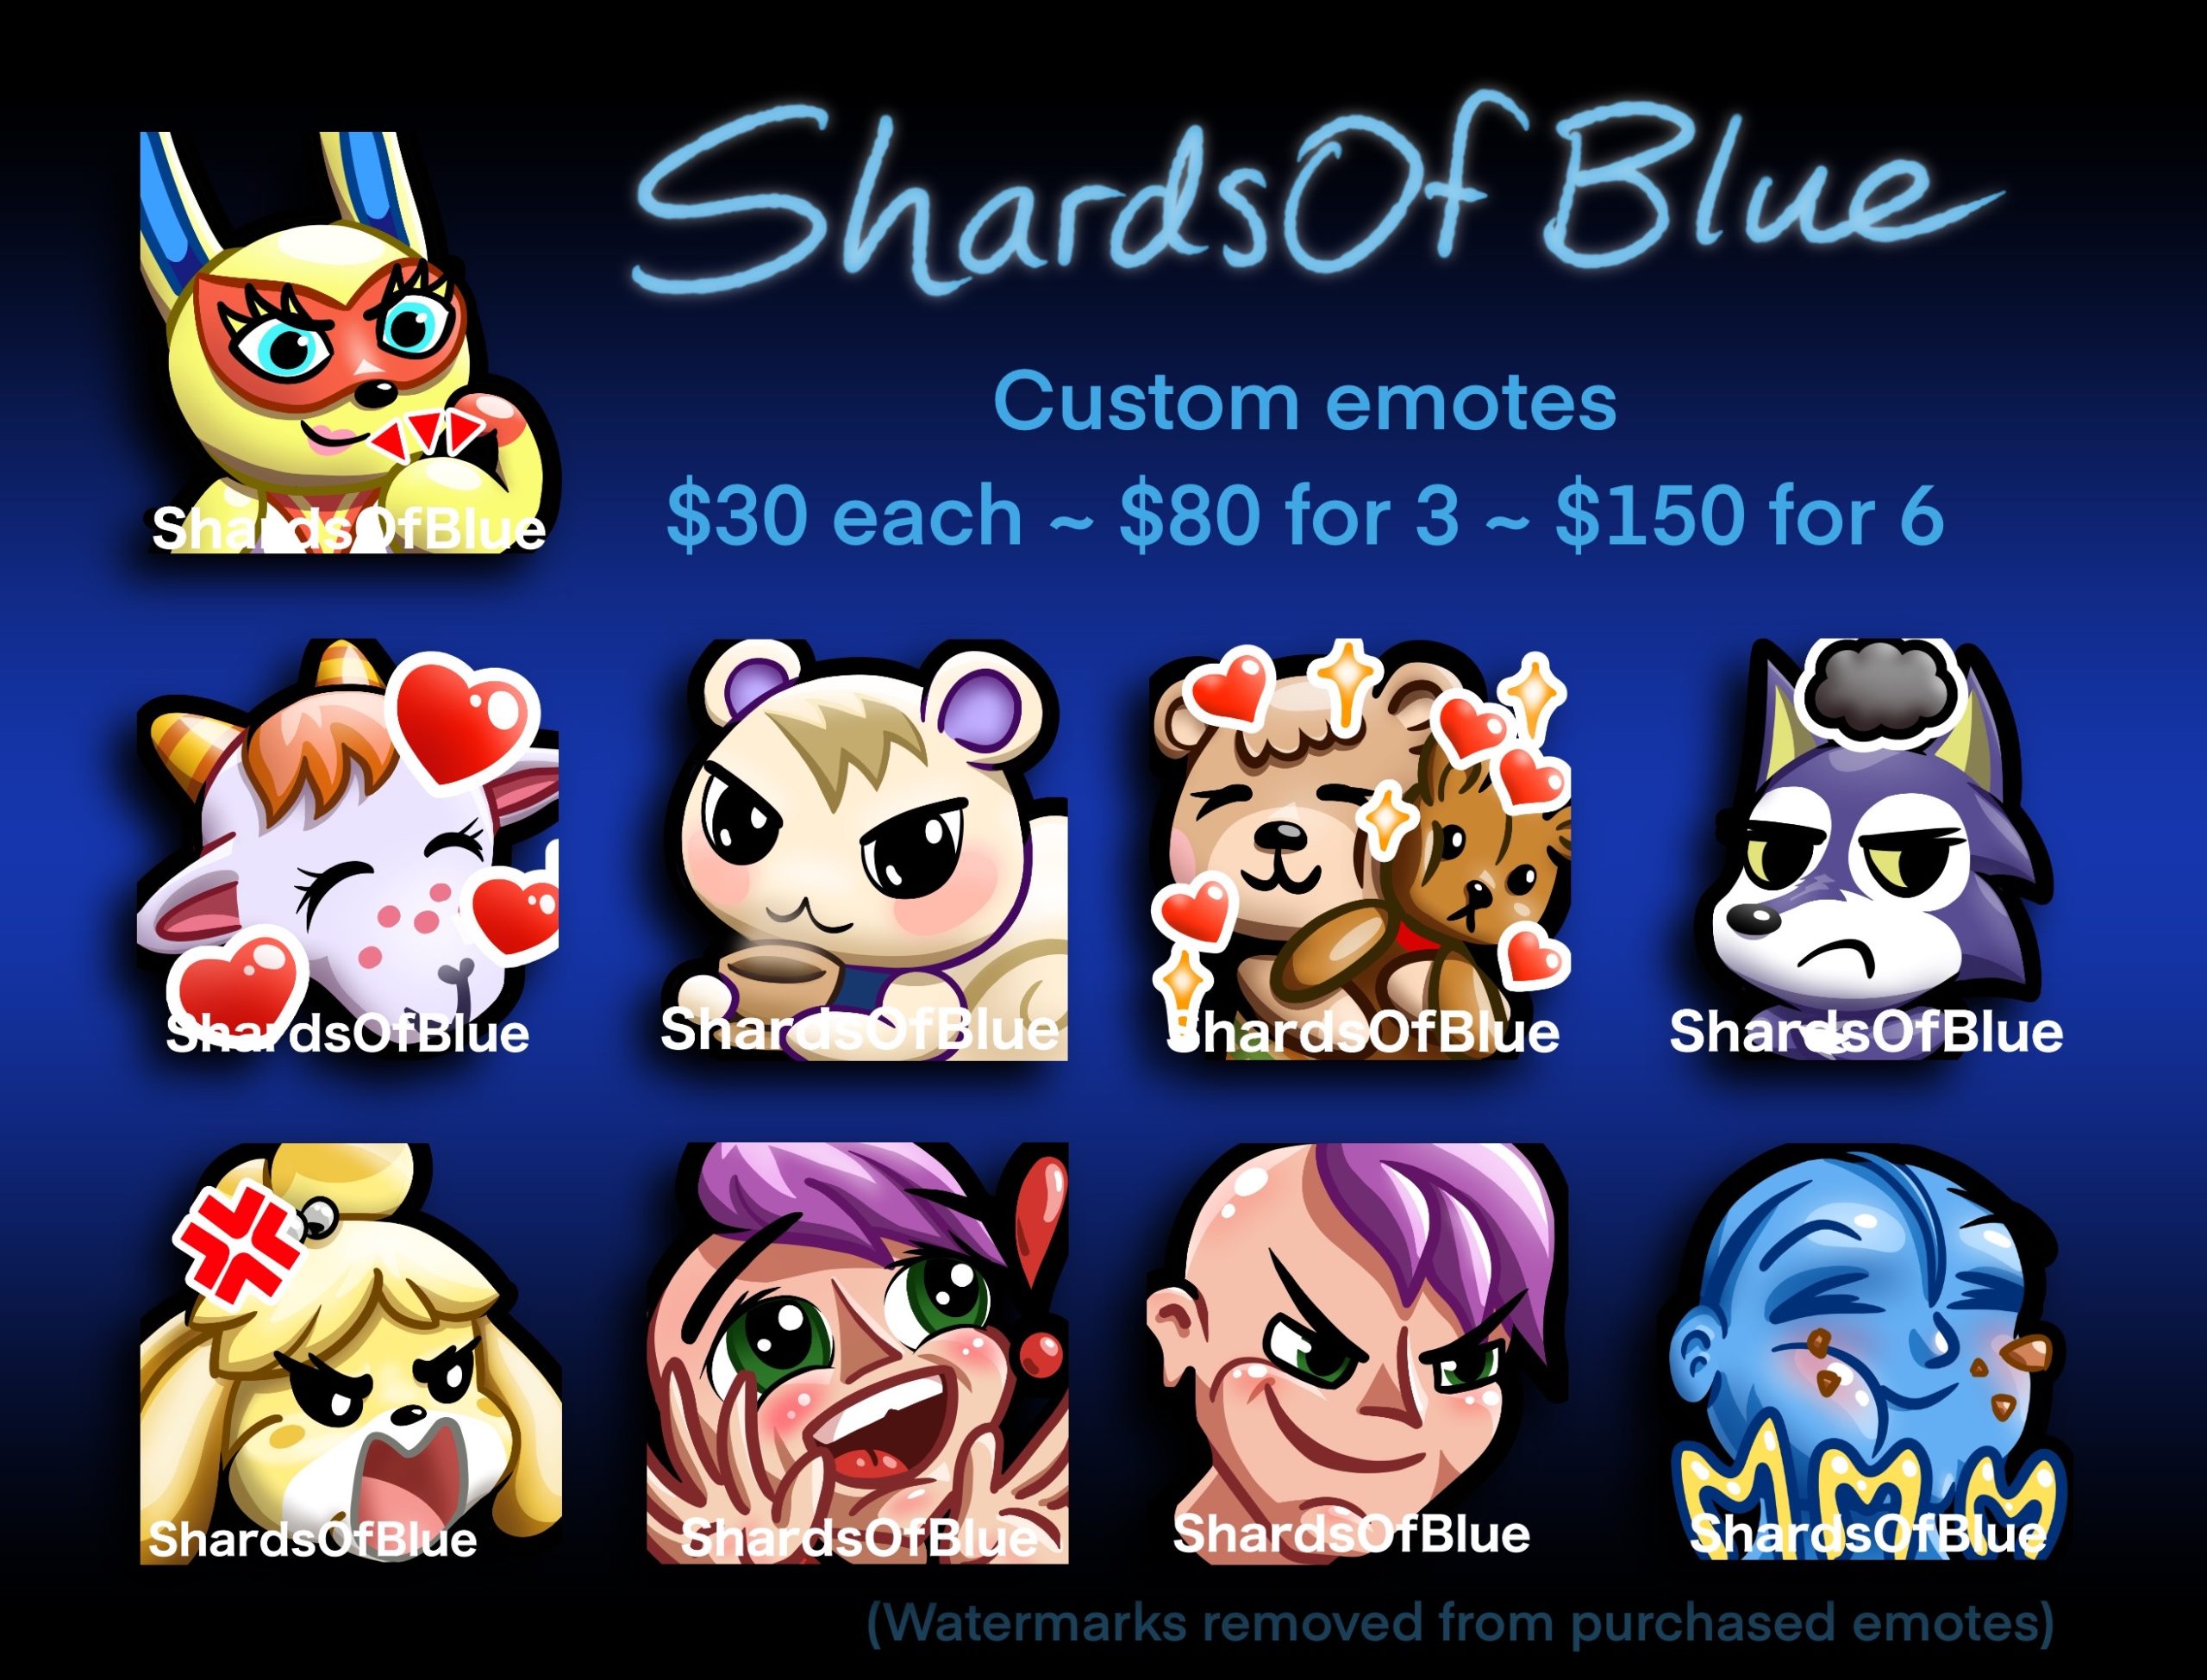 Custom emote prices: $30 each, $80 for 3, $150 for 6